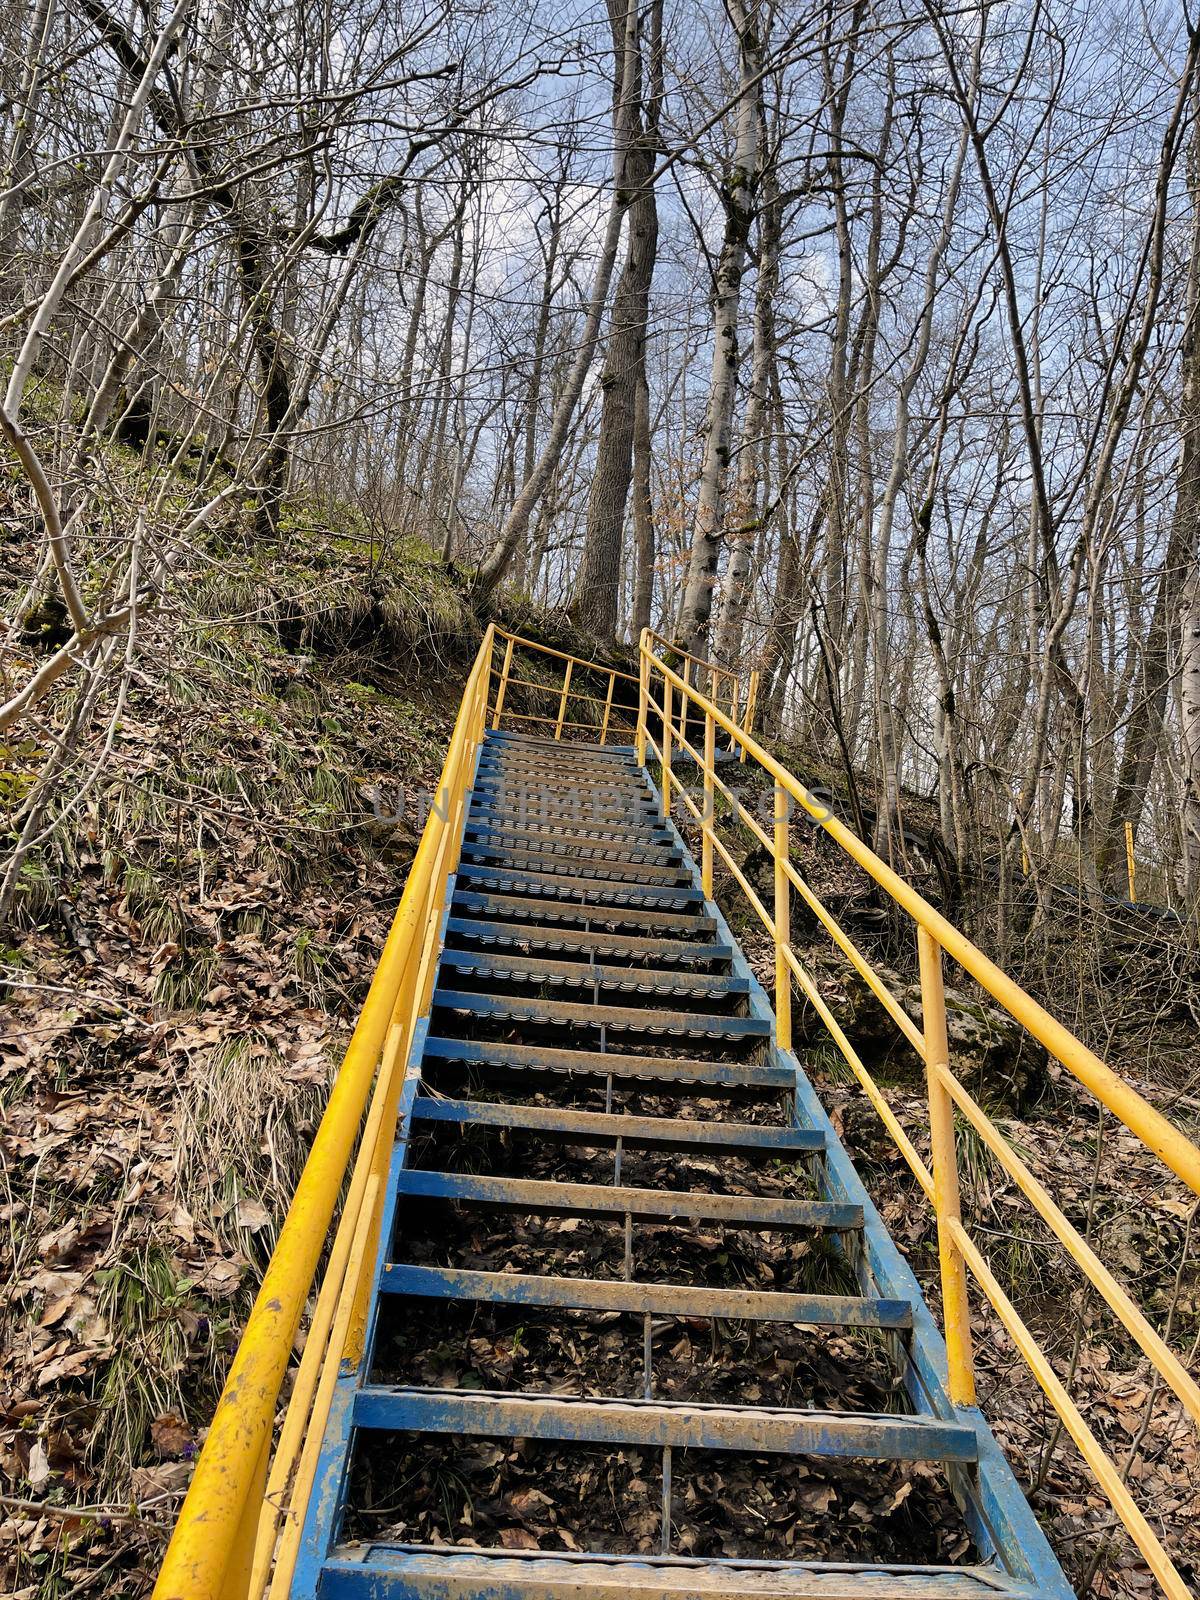 Close up of metal staircase in woodland. Metal stairway to overcome obstacles in mountainous terrain